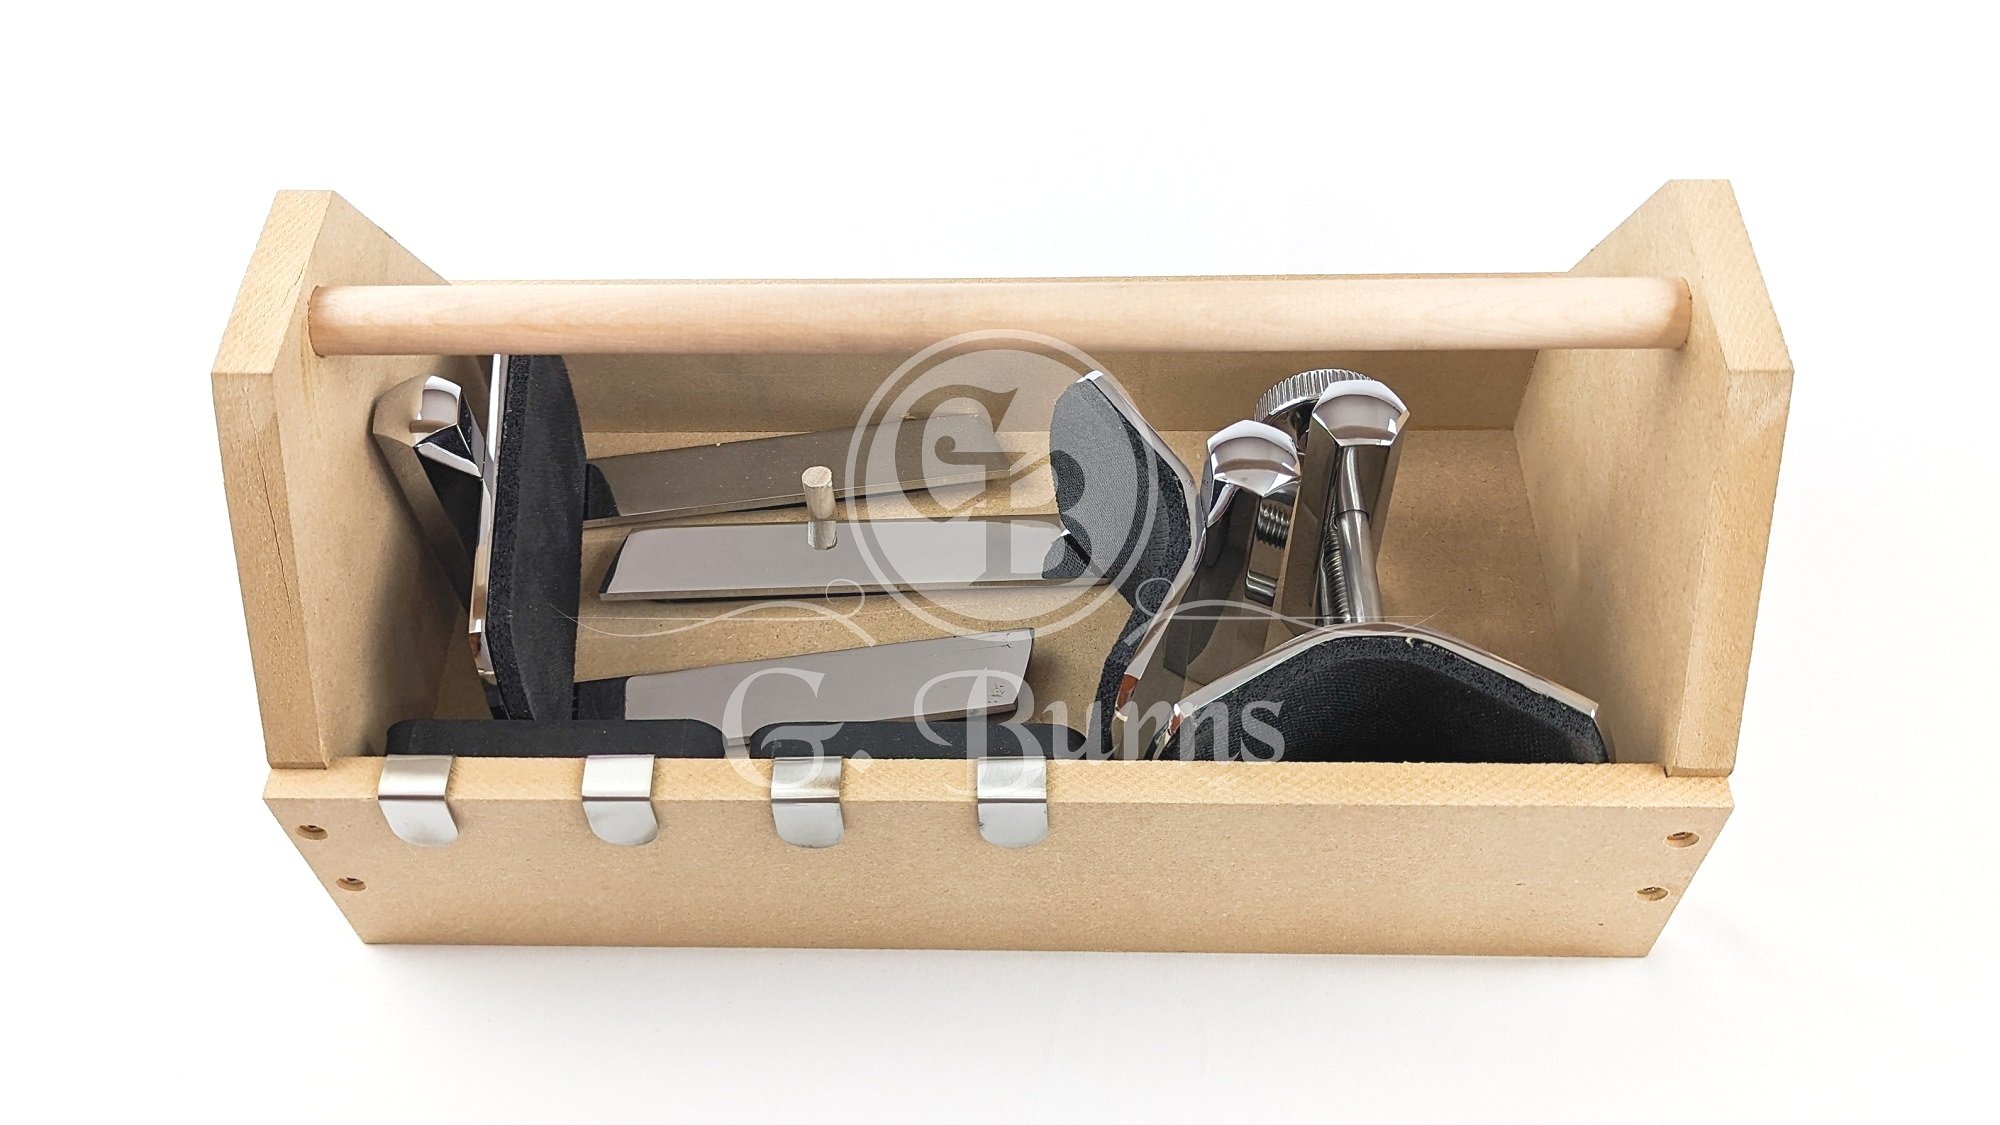 Cremation Urn Holder Kit in Storage Box (included)